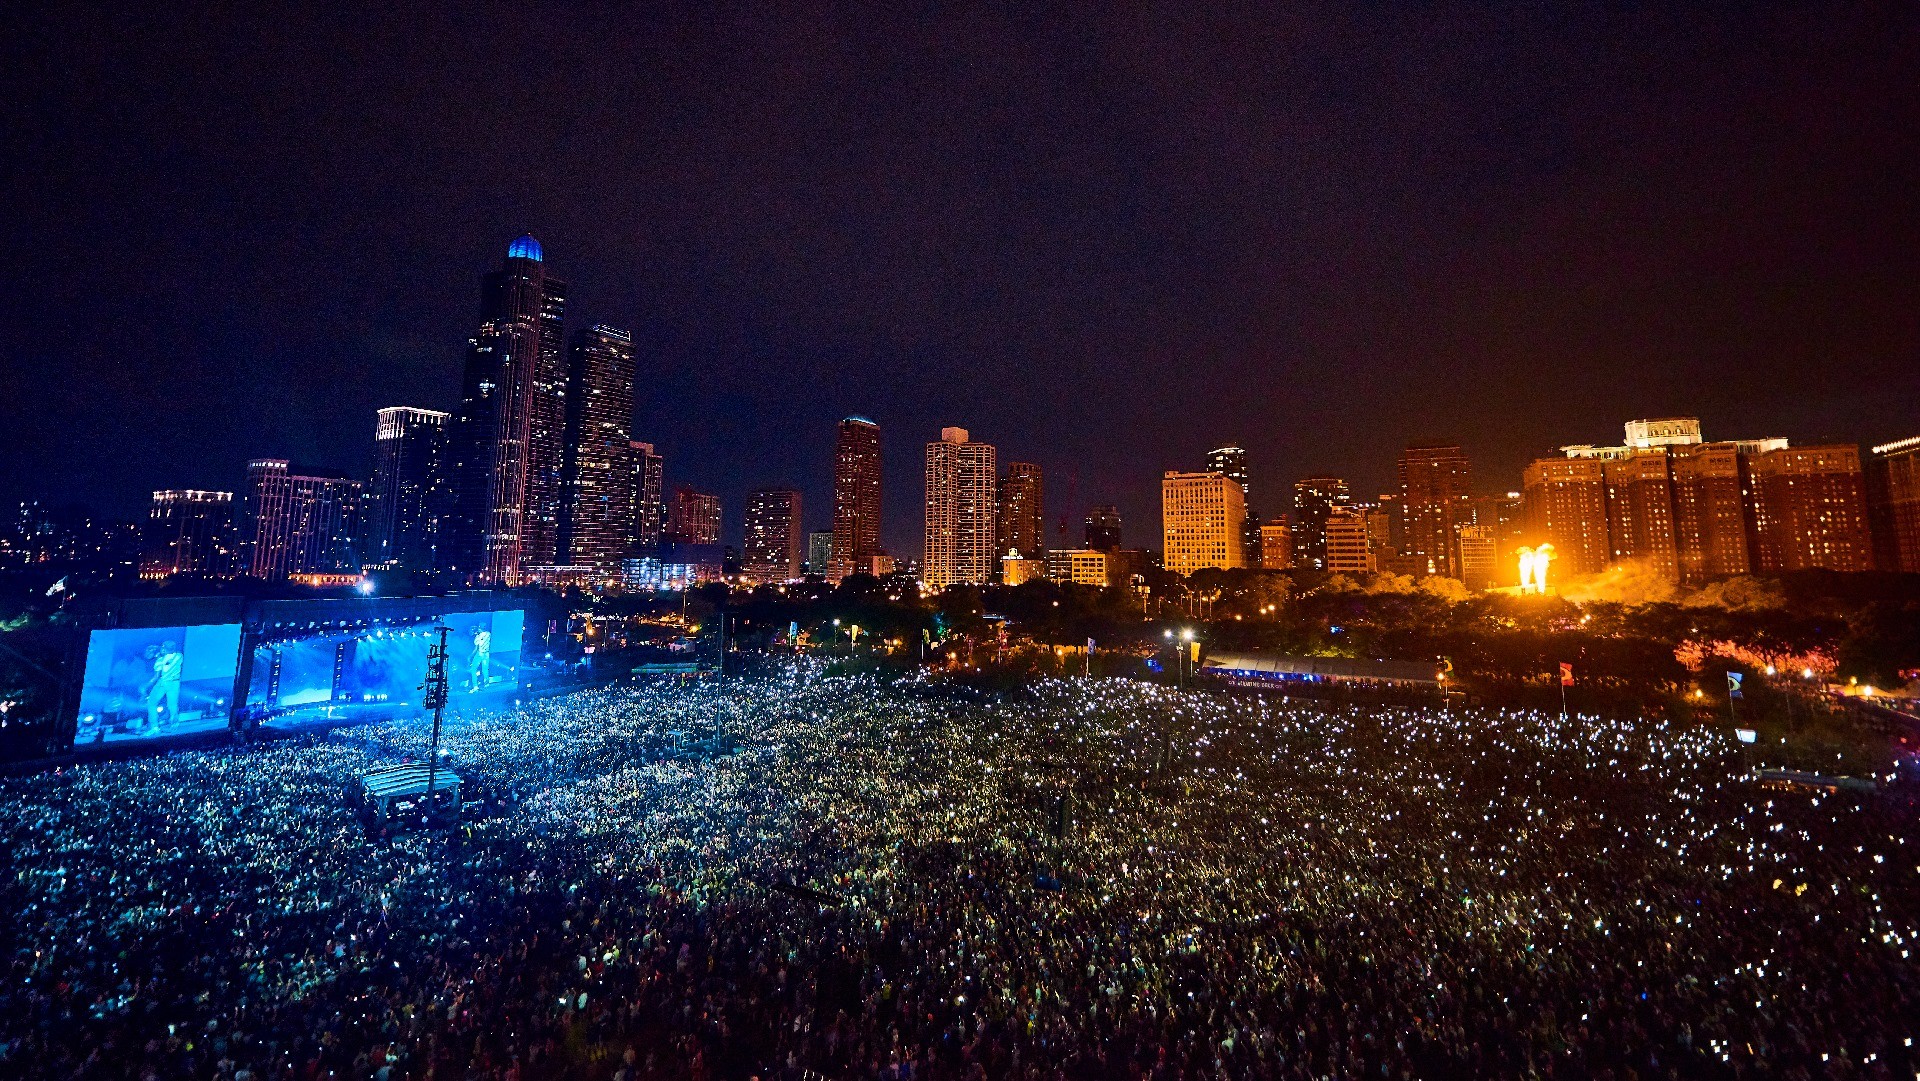 Lollapalooza’s Founder Sounds Upbeat About 2021 Events